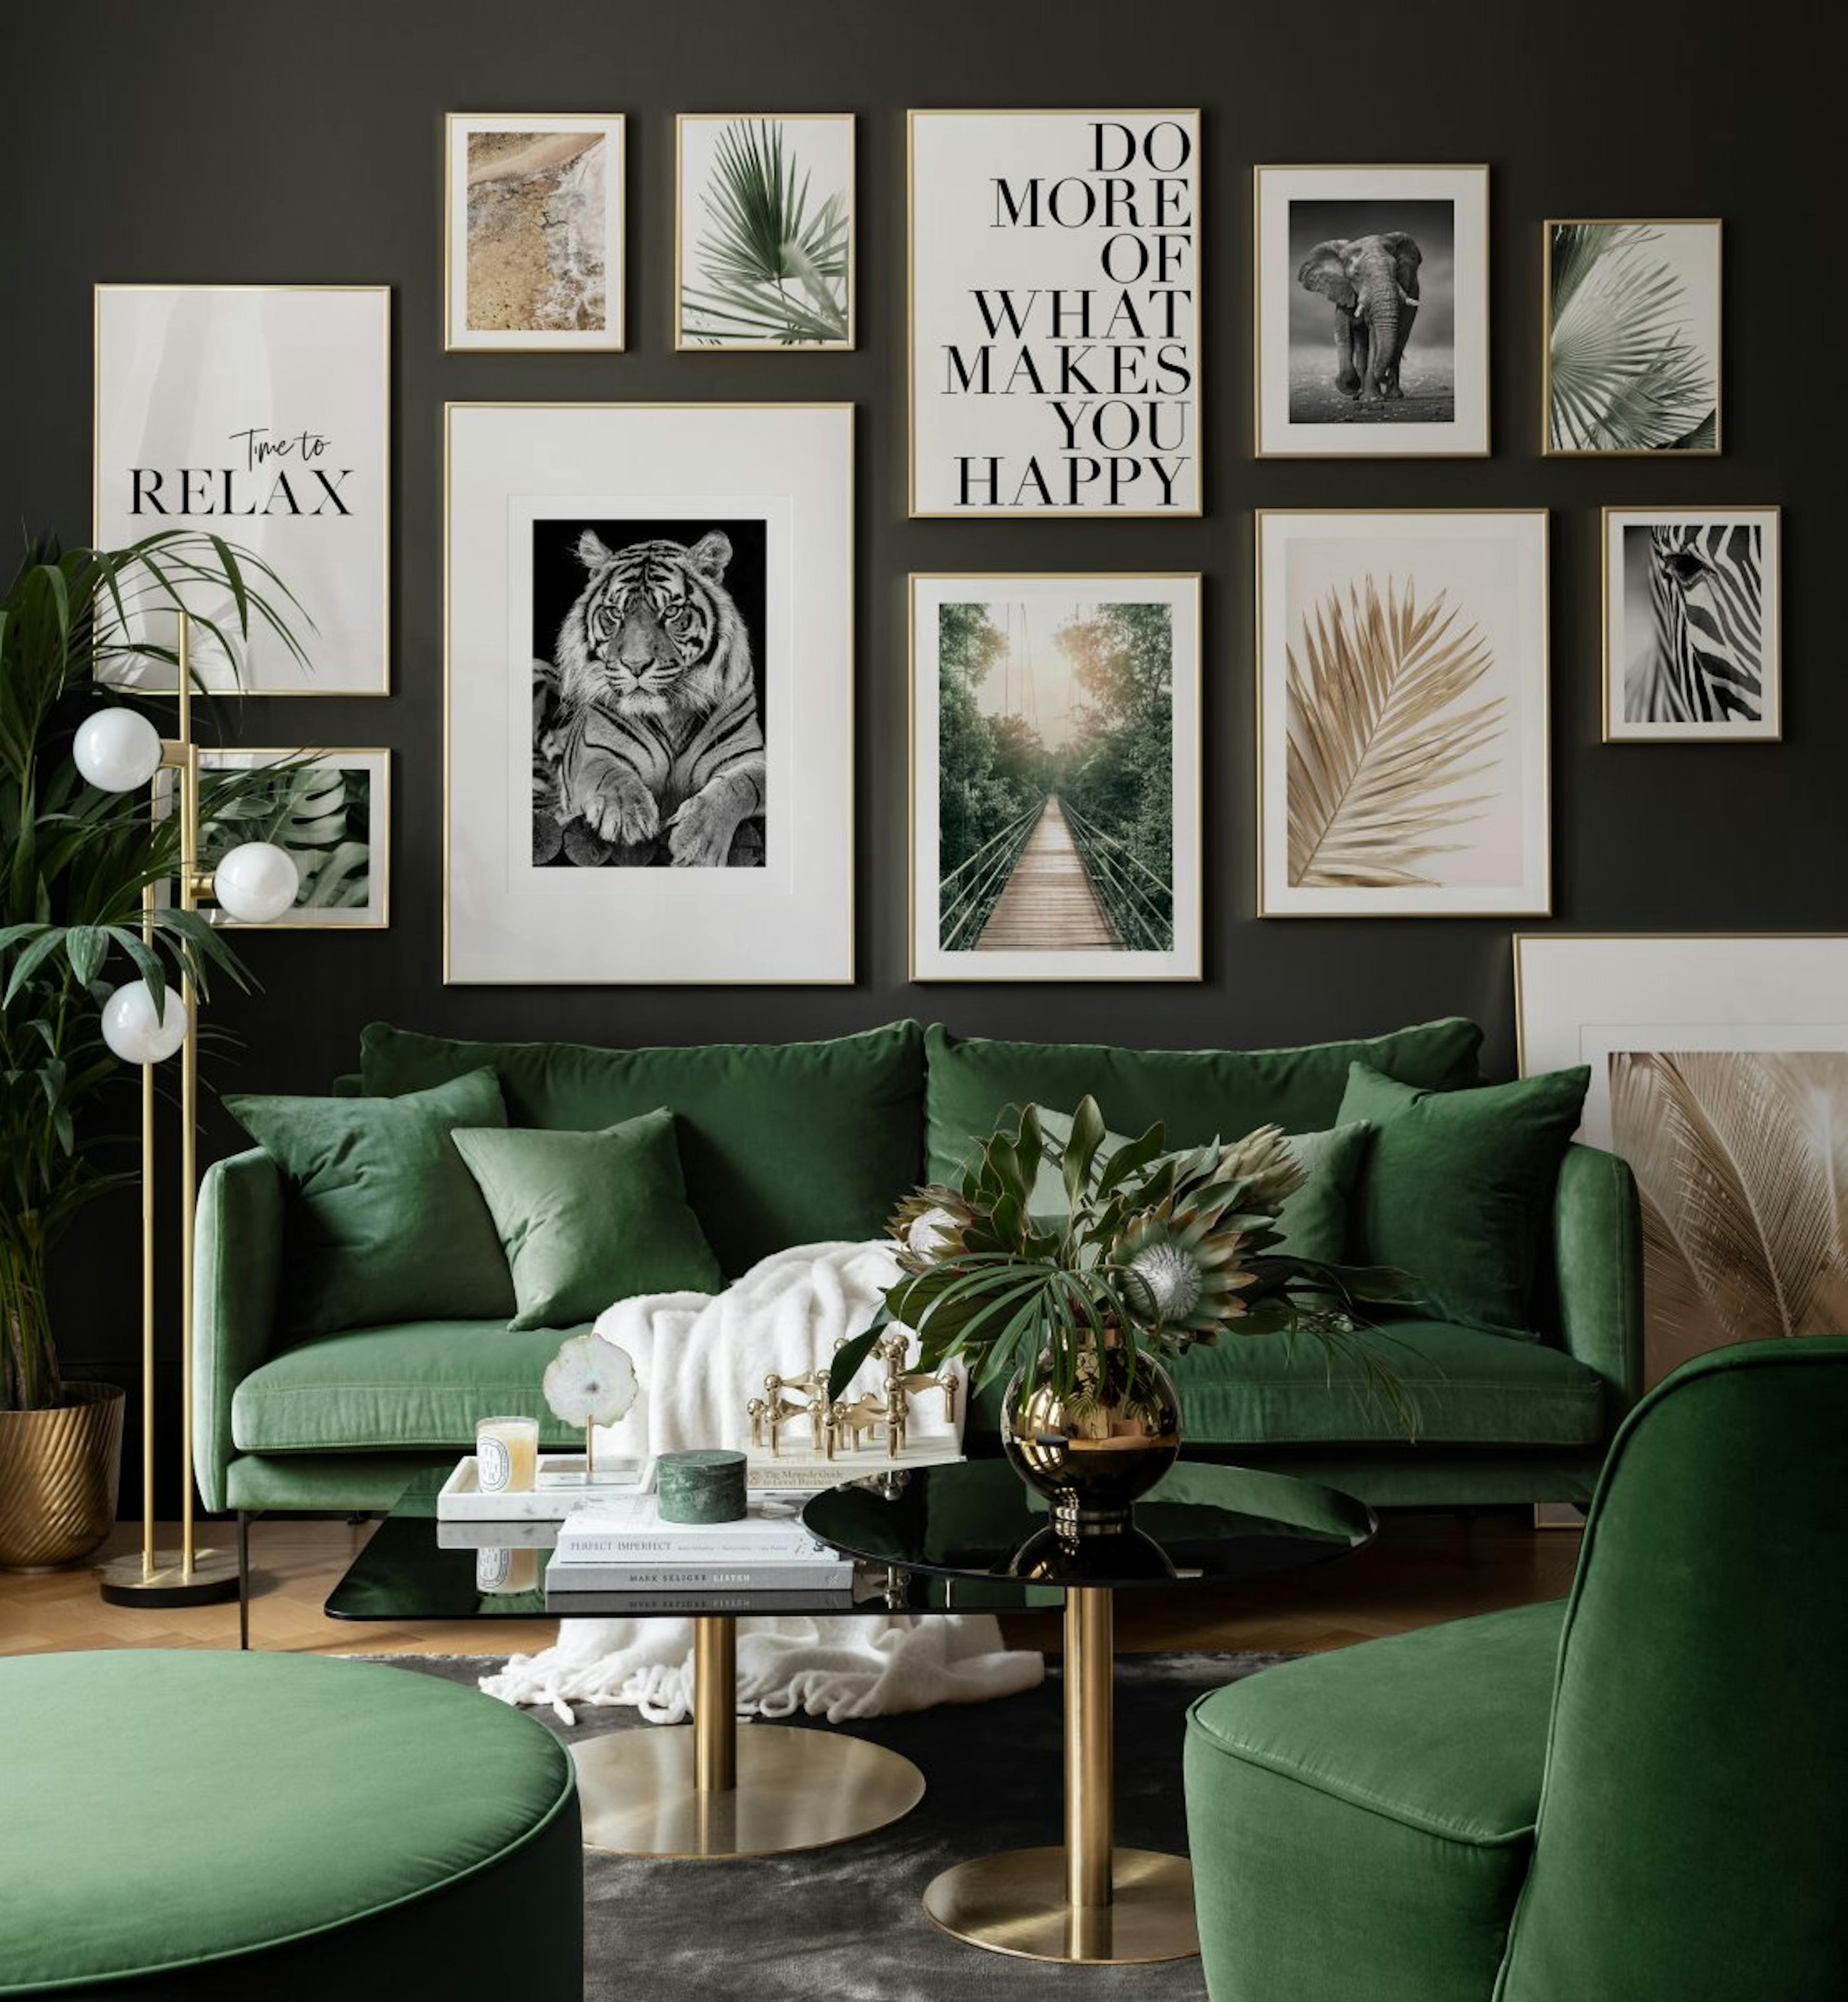 Animal photographs combined with flower and quote prints for living room